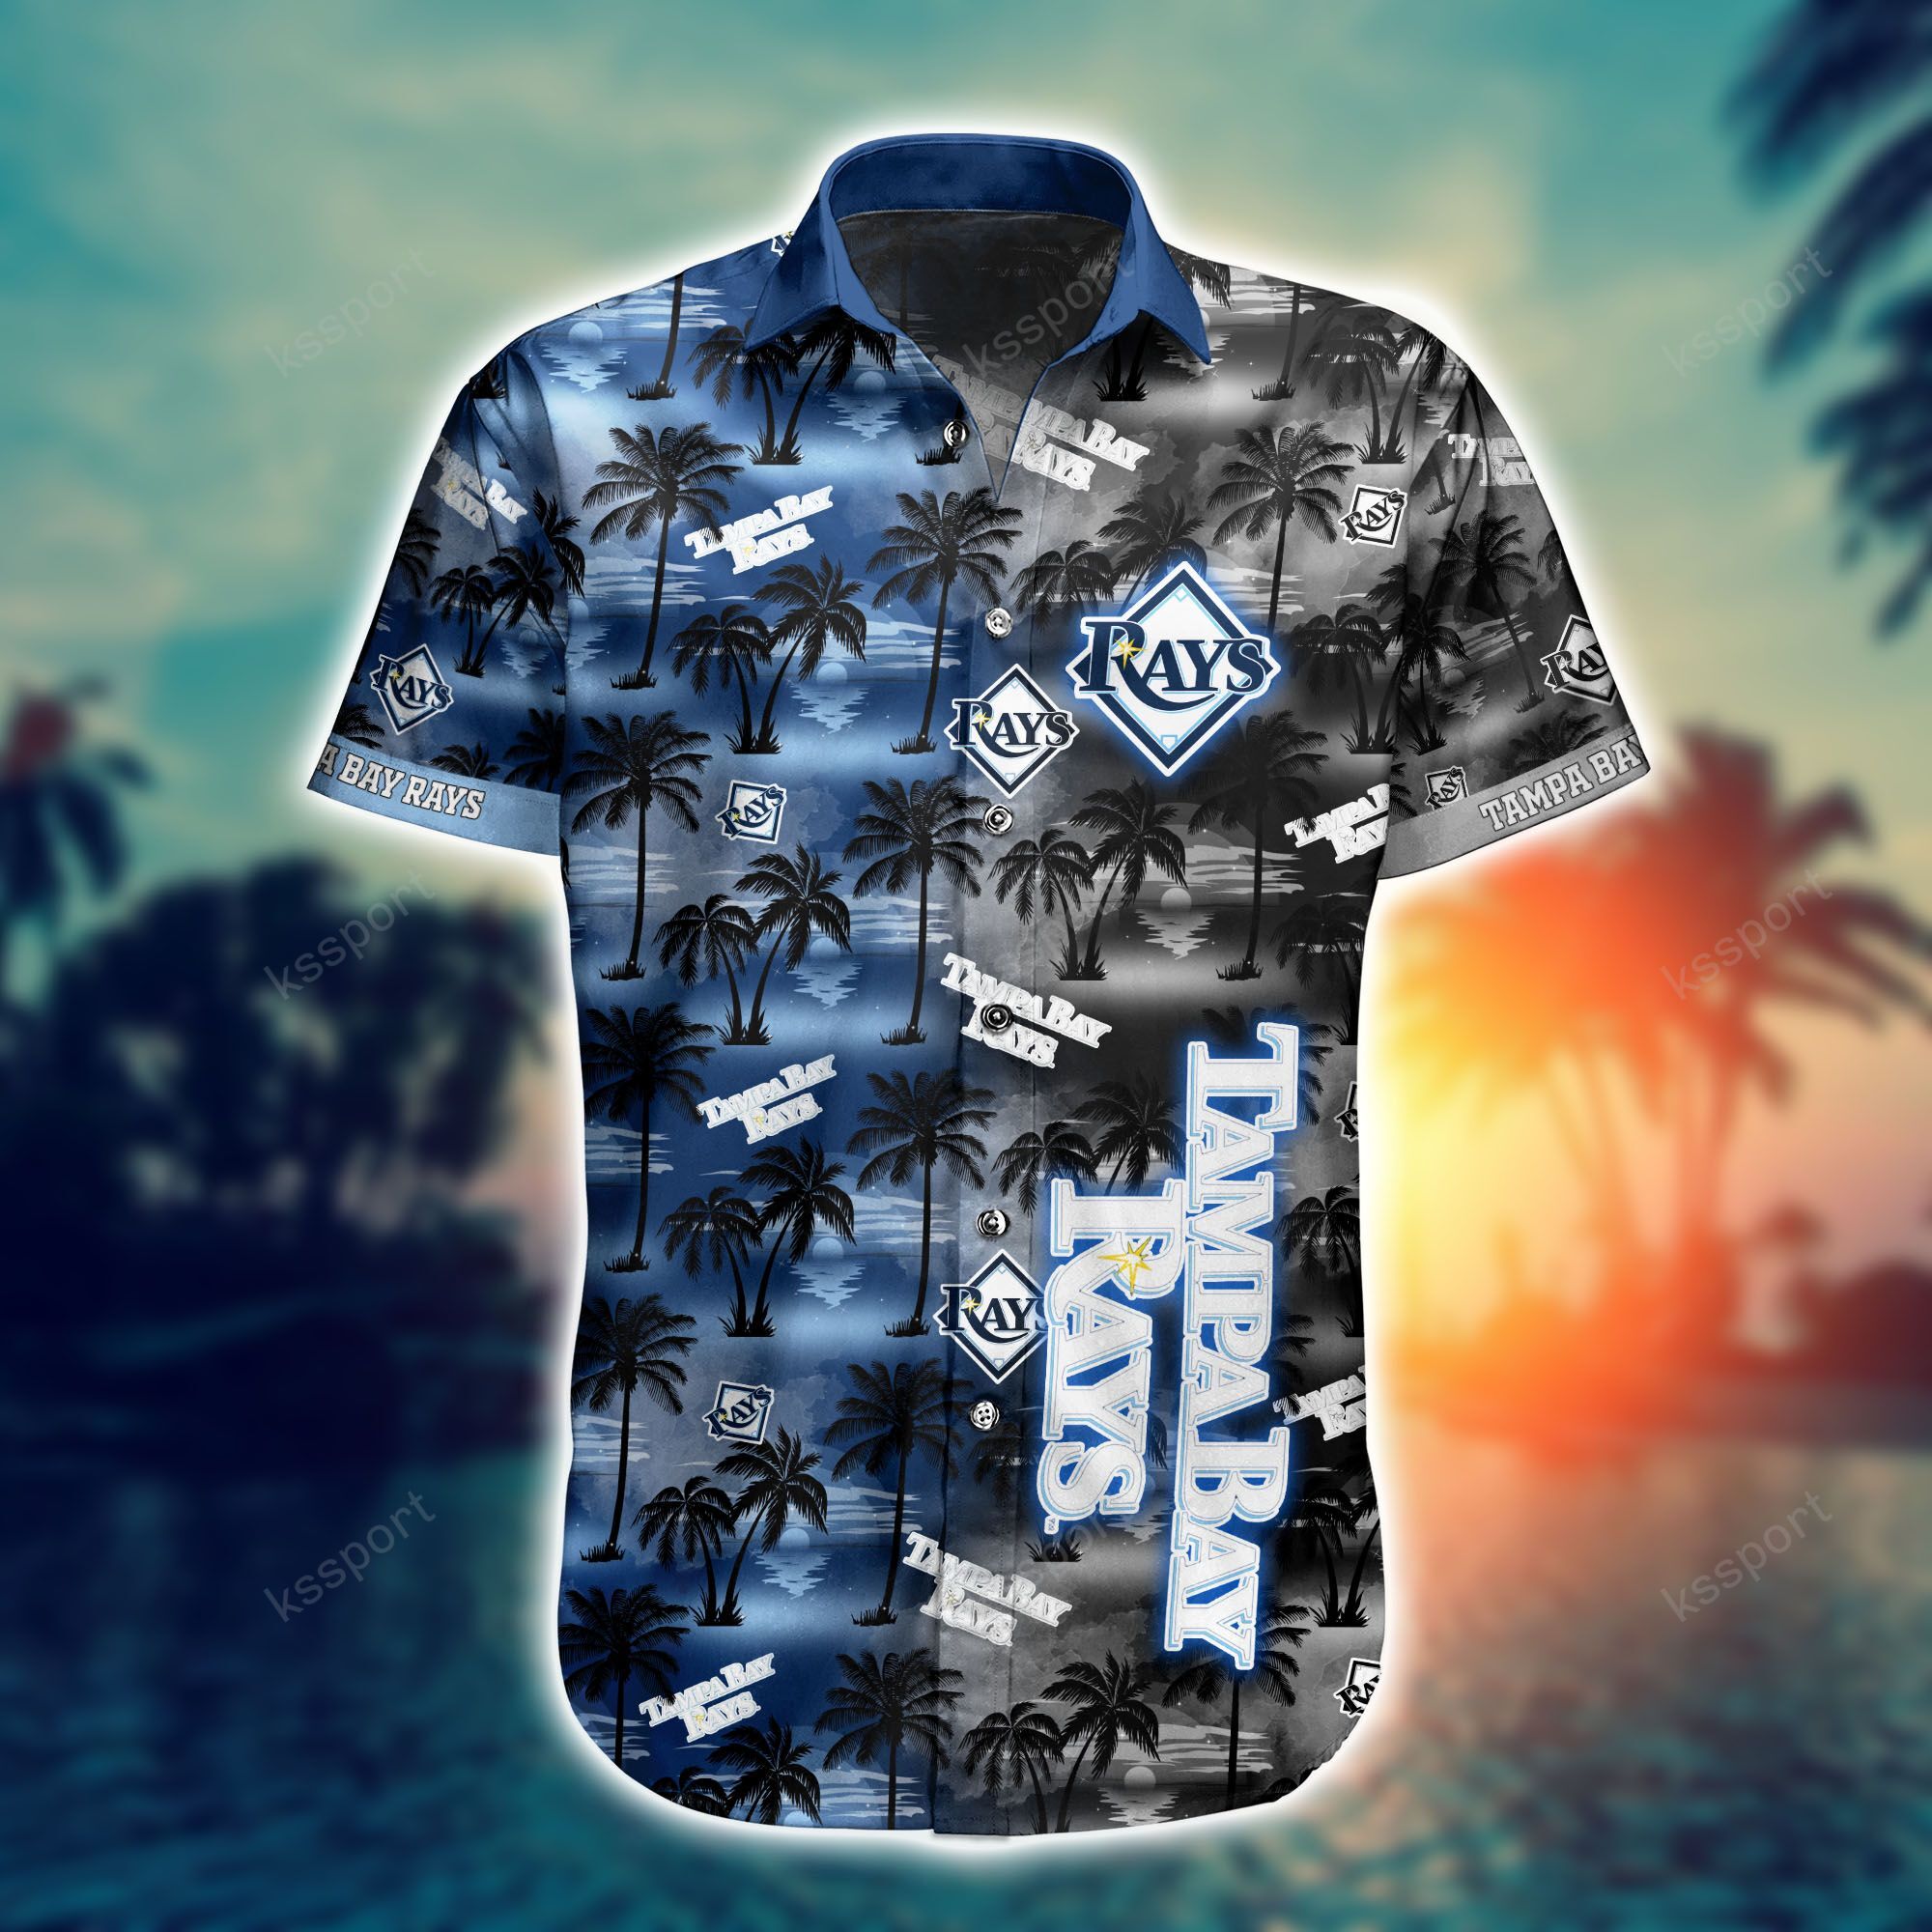 Top cool Hawaiian shirt 2022 - Make sure you get yours today before they run out! 113